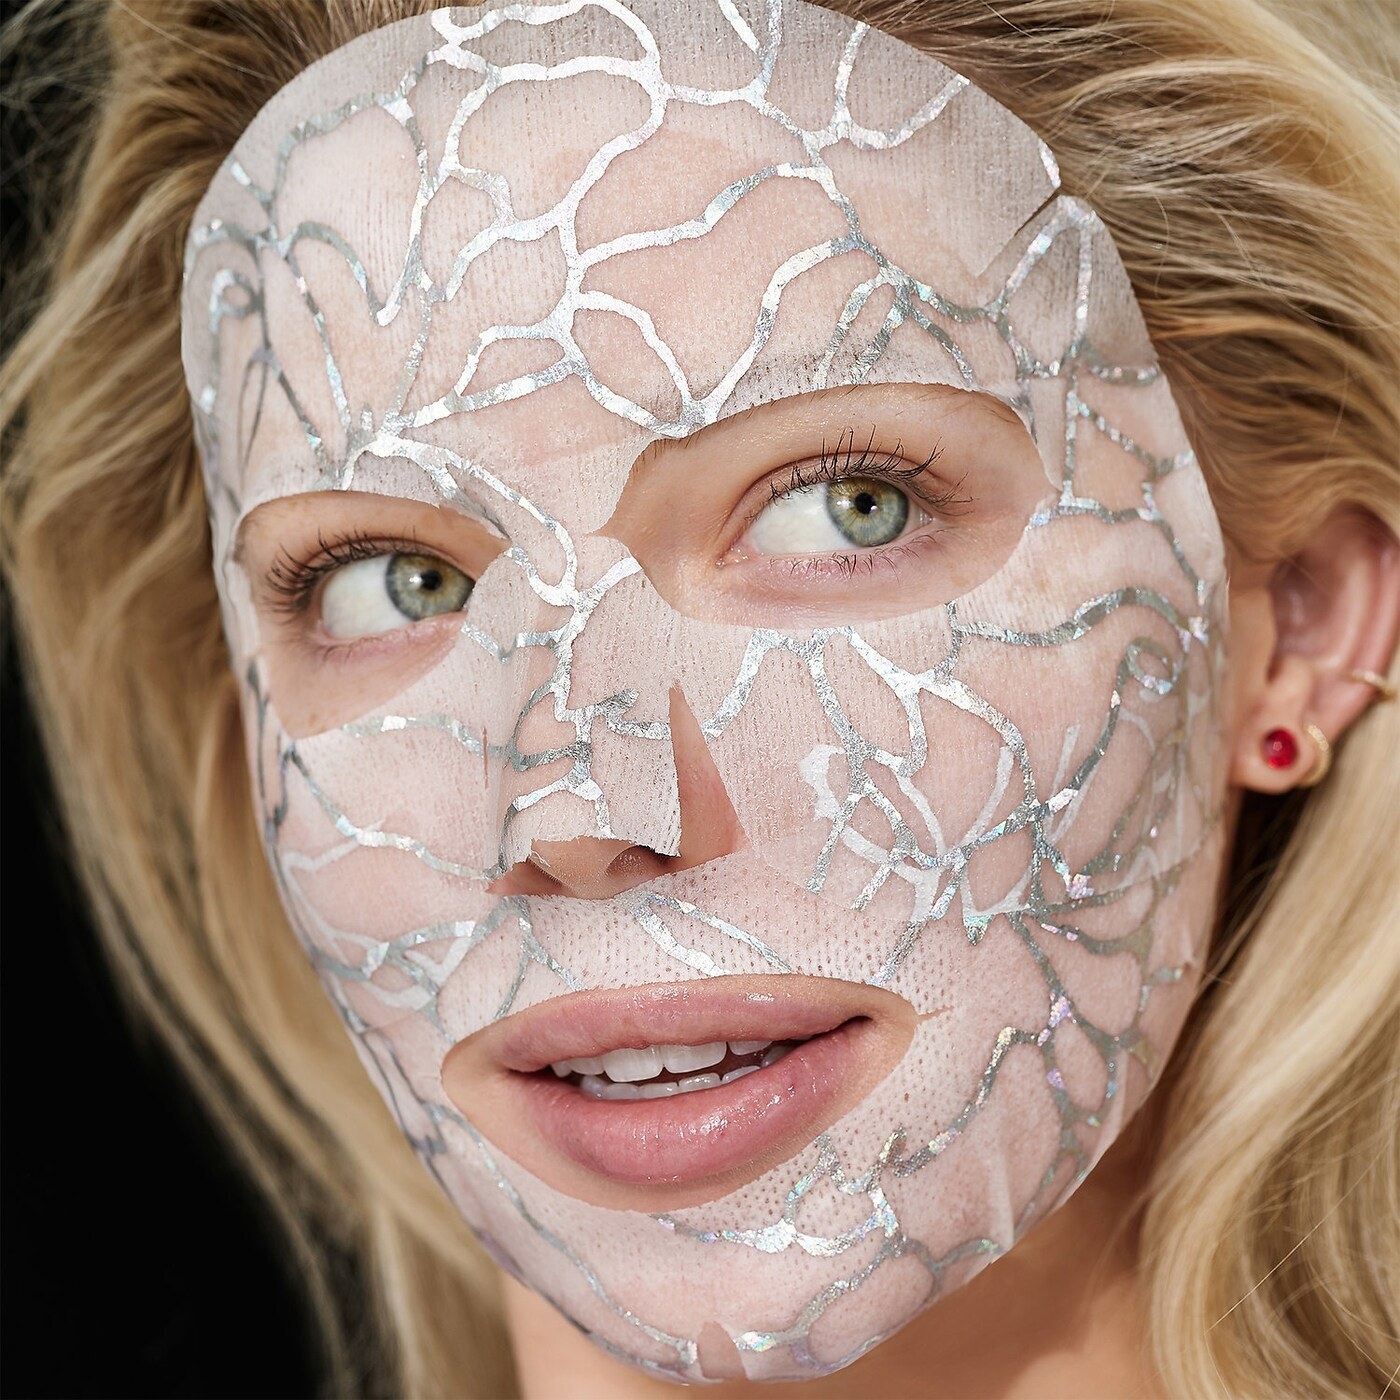 a person wearing the two-piece sheet mask; metallic detailing is visible